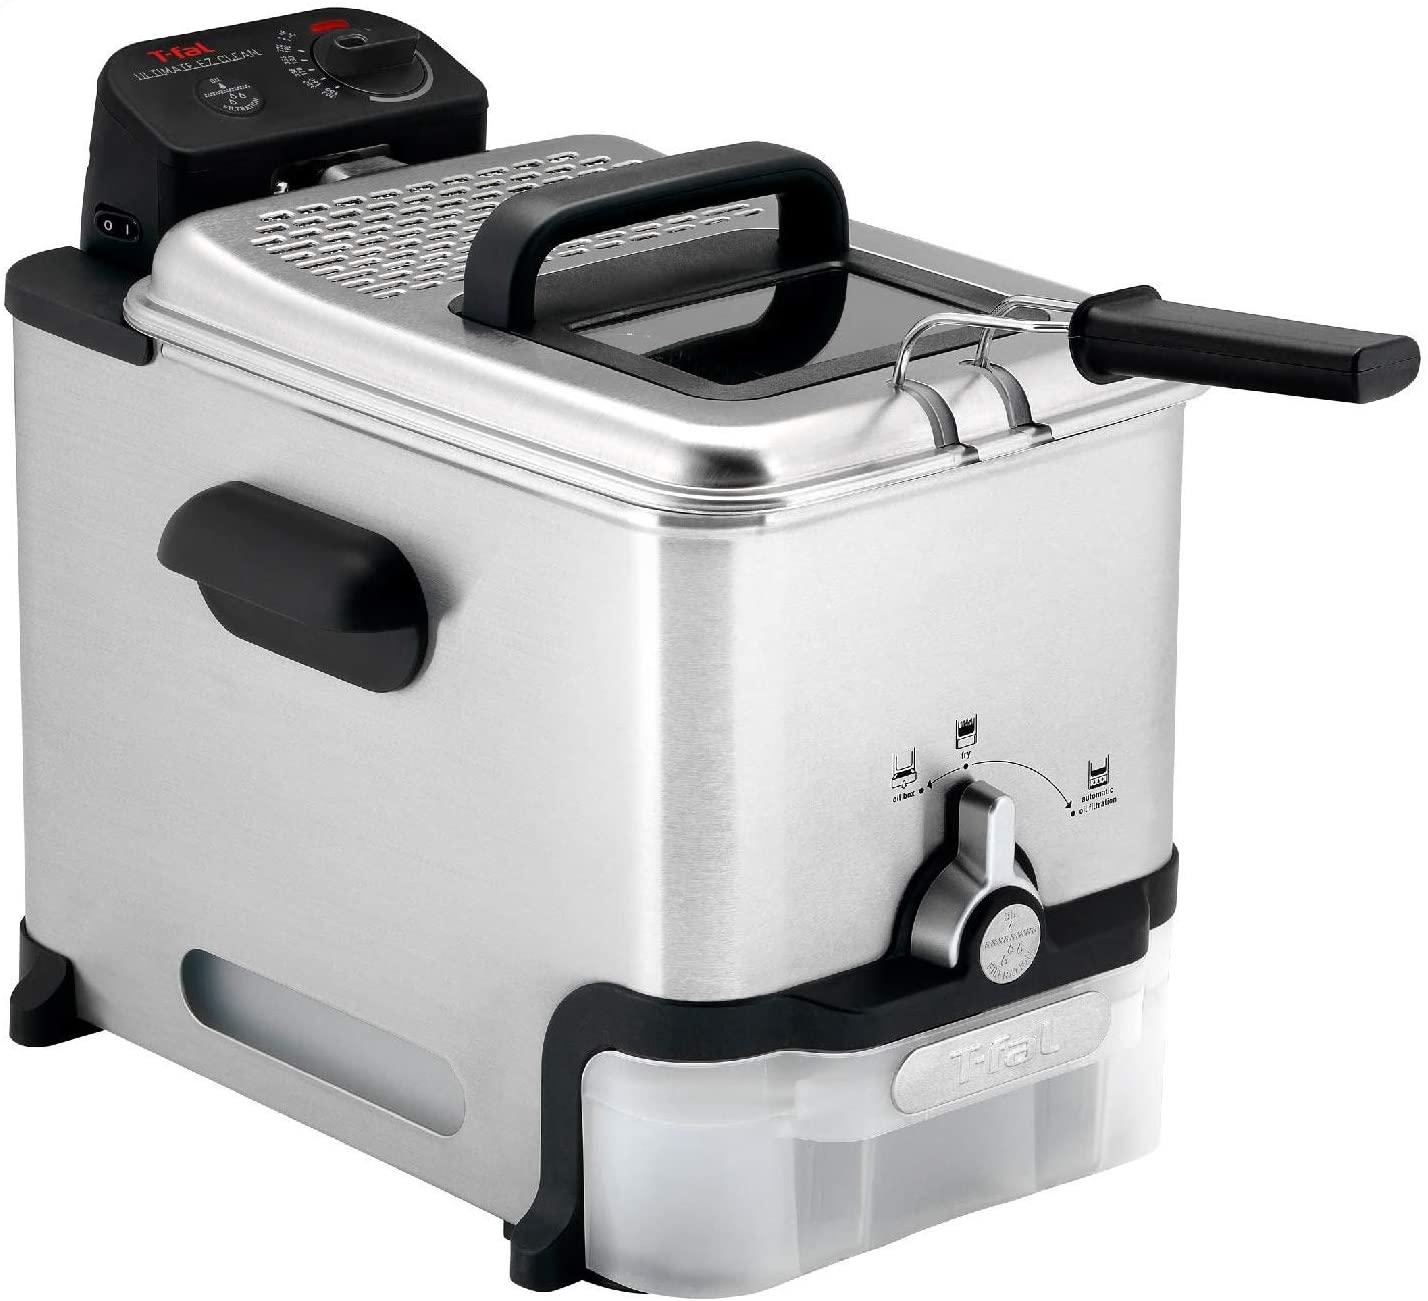 T-fal Deep Fryer with Basket for $74.99 Shipped